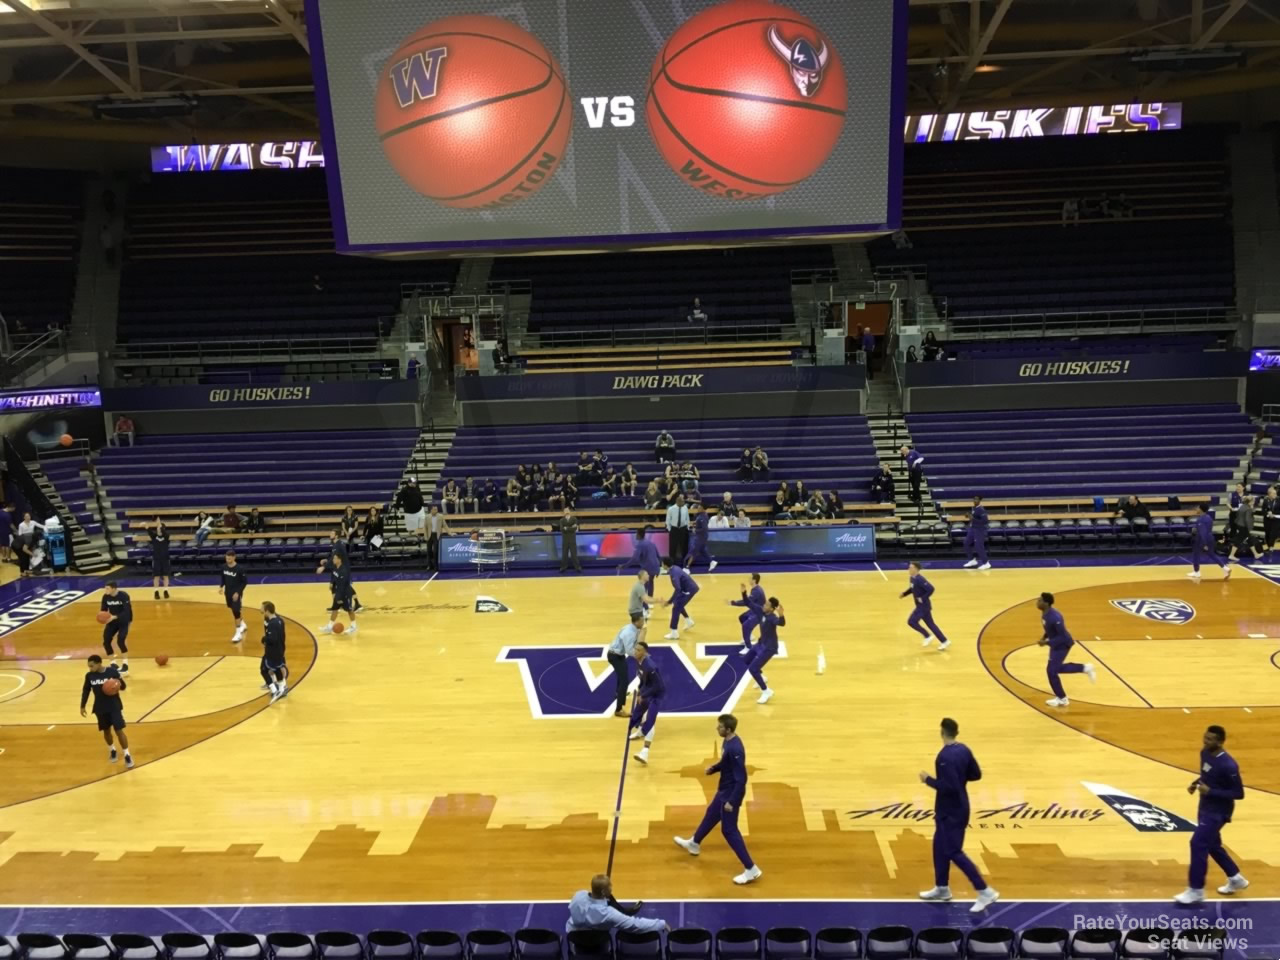 section 8, row 10 seat view  - alaska airlines arena